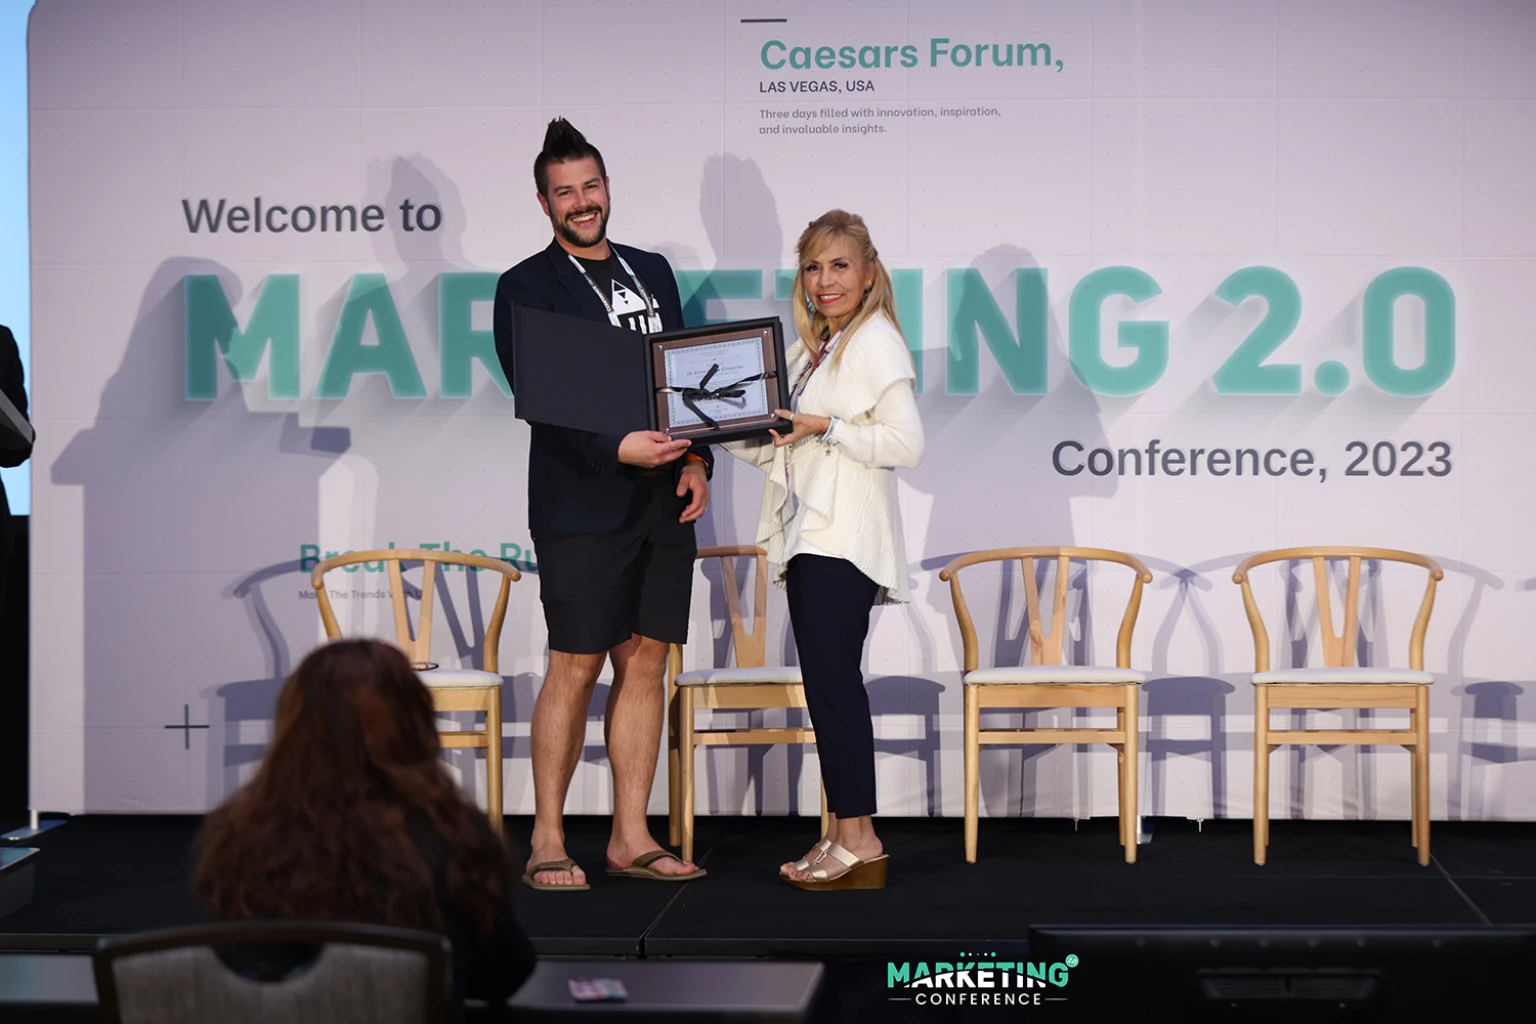 Chaz Faulhaber’s groundbreaking strides in marketing and brand management have earned him this prestigious recognition at the Marketing 2.0 Conference.